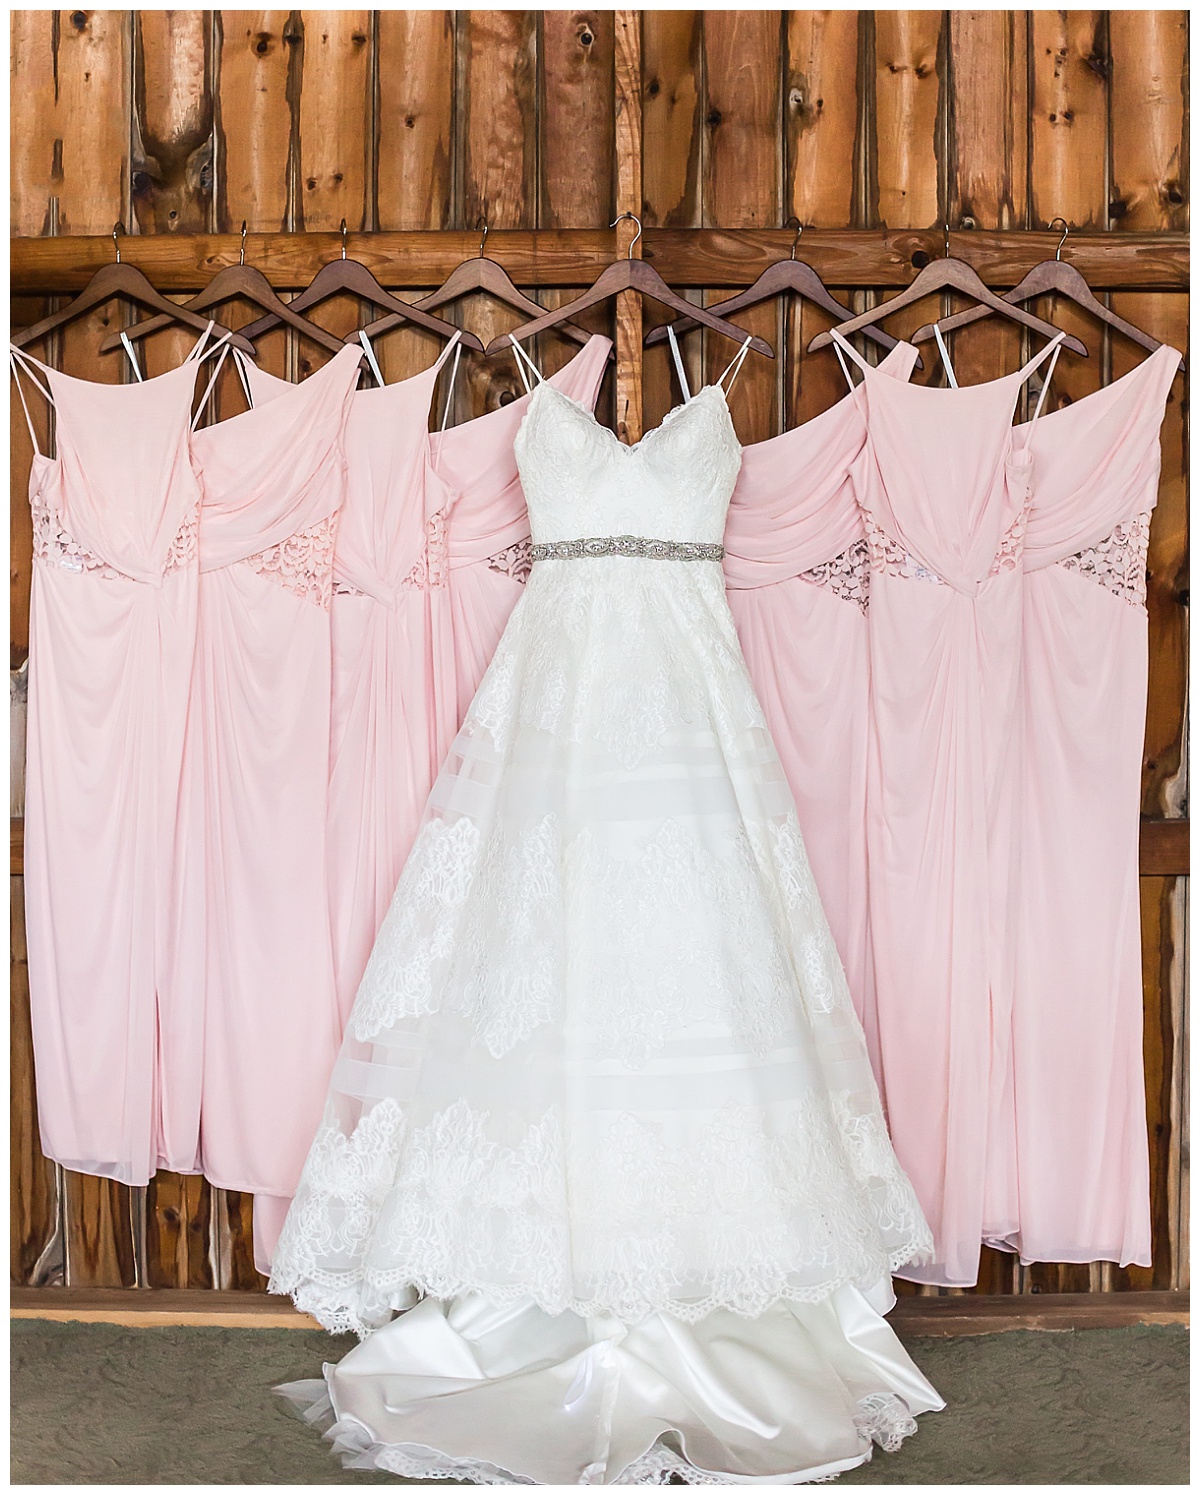 white ball gown style wedding dress hung with pink bridesmaids dresses with wooden background